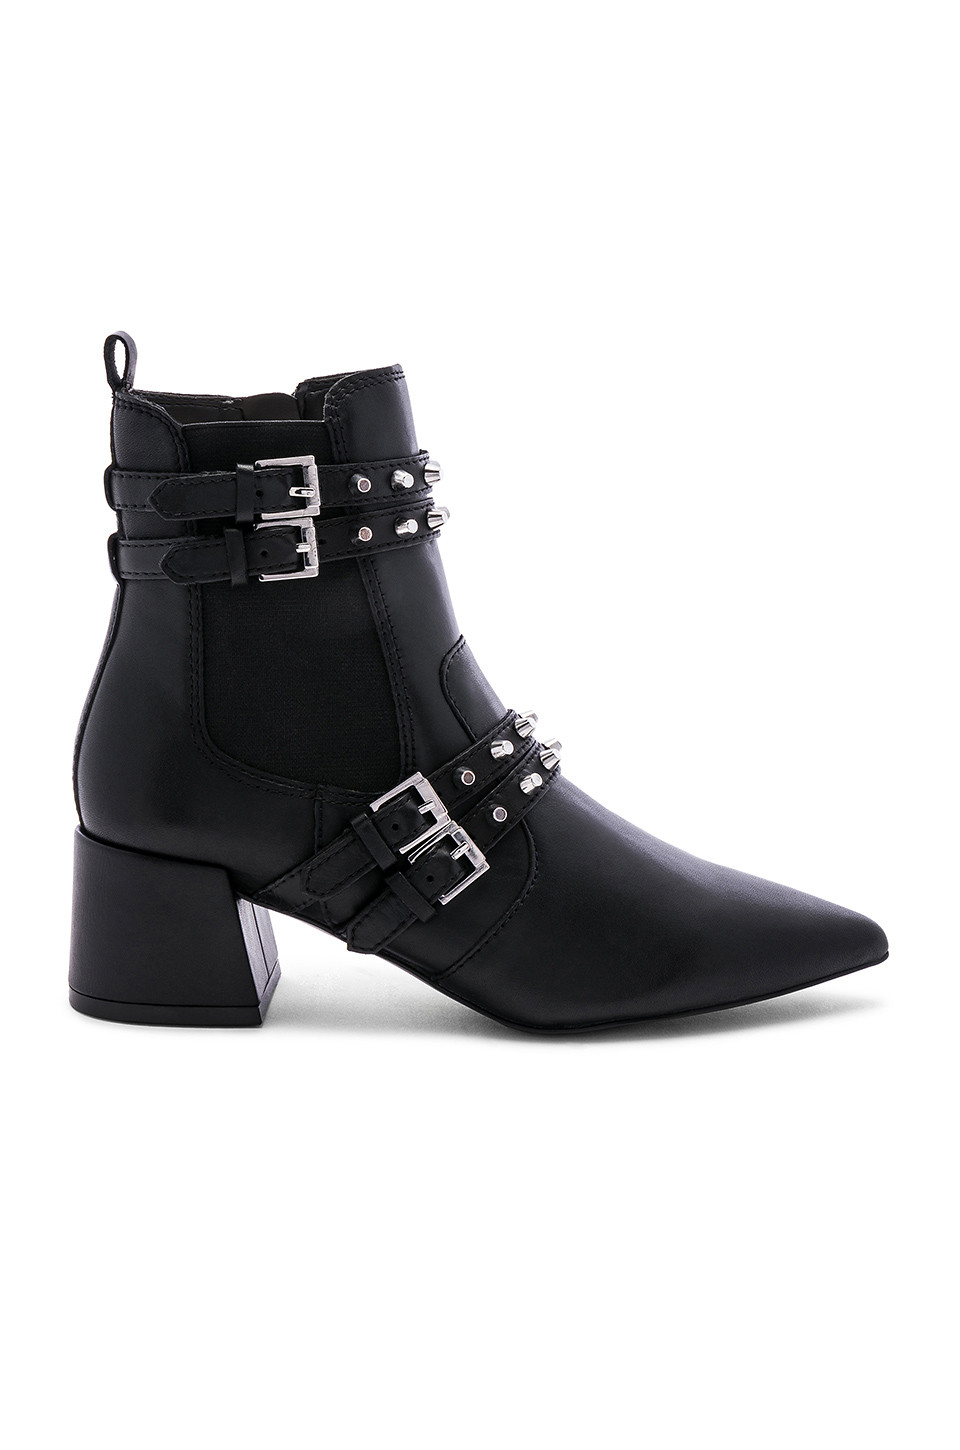 Rad bootie Boots by KENDALL + KYLIE